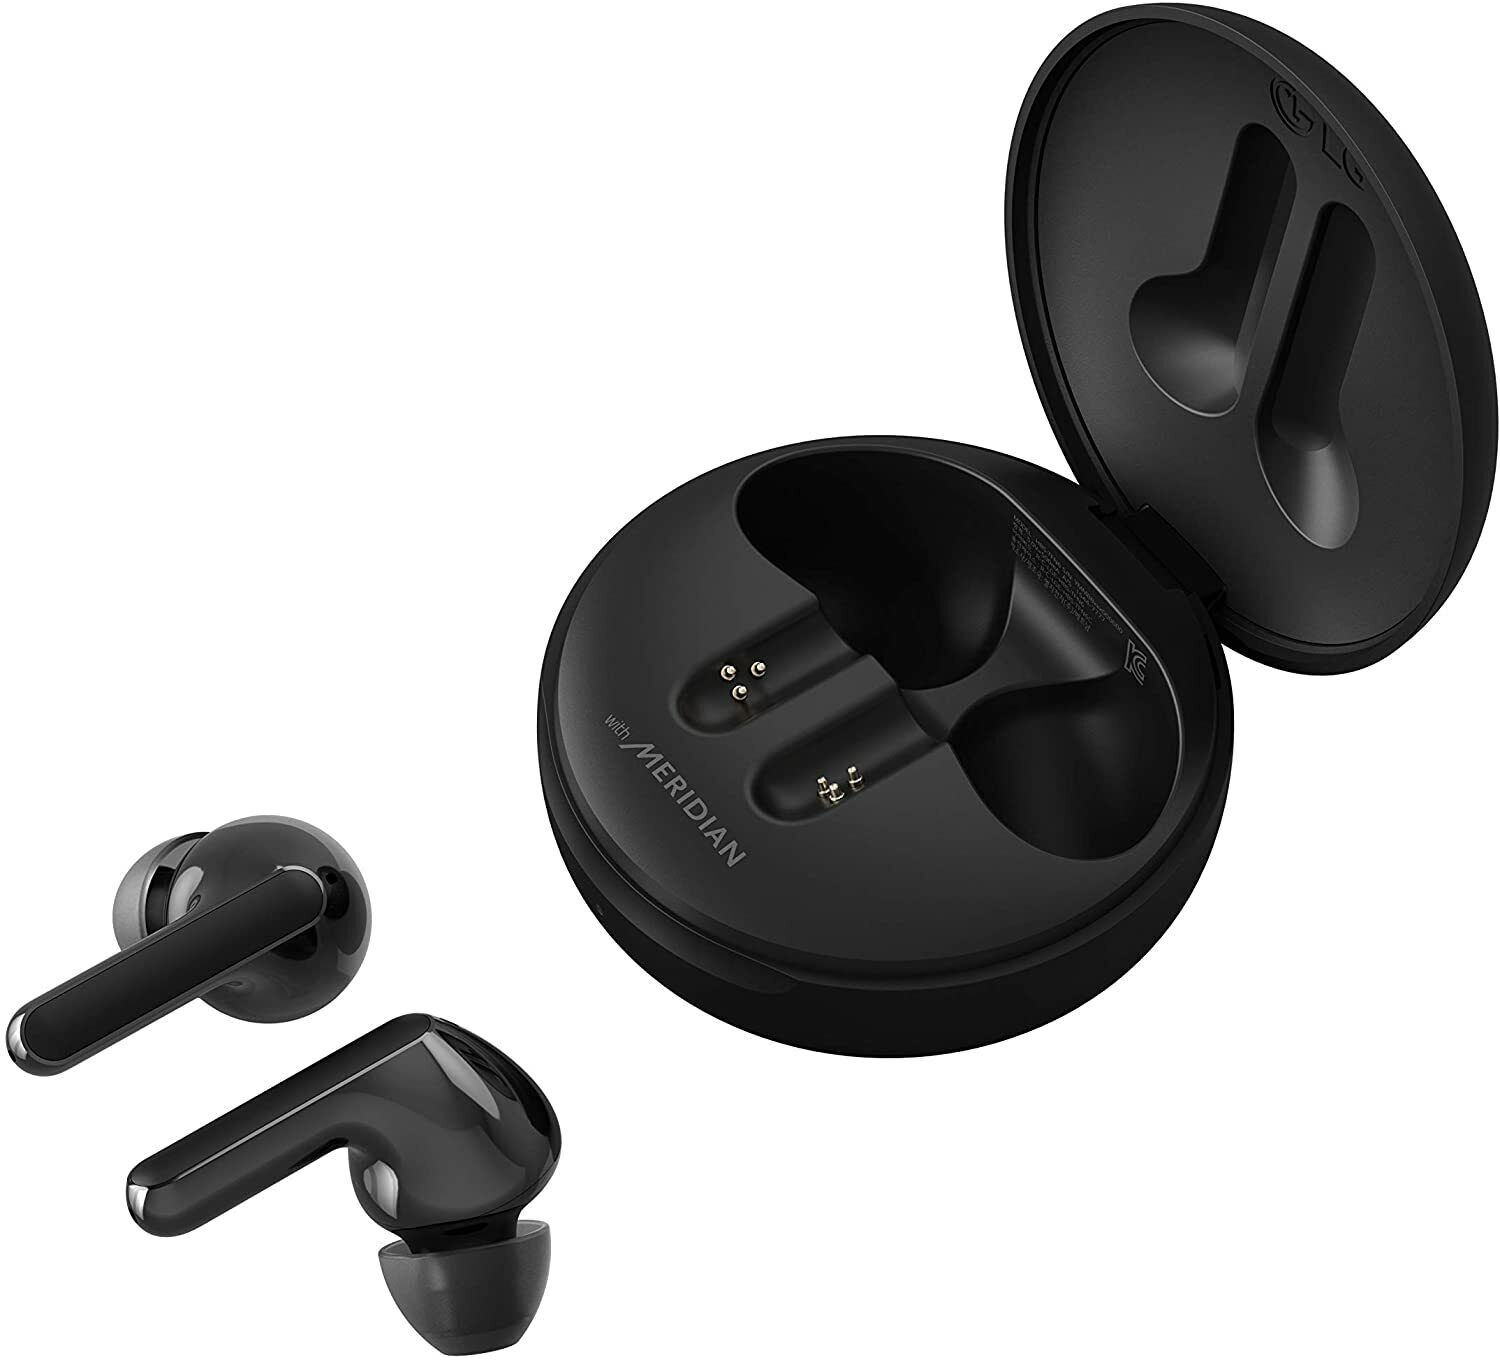 Step-by-Step Guide To Pairing LG Tone Wireless Earbuds